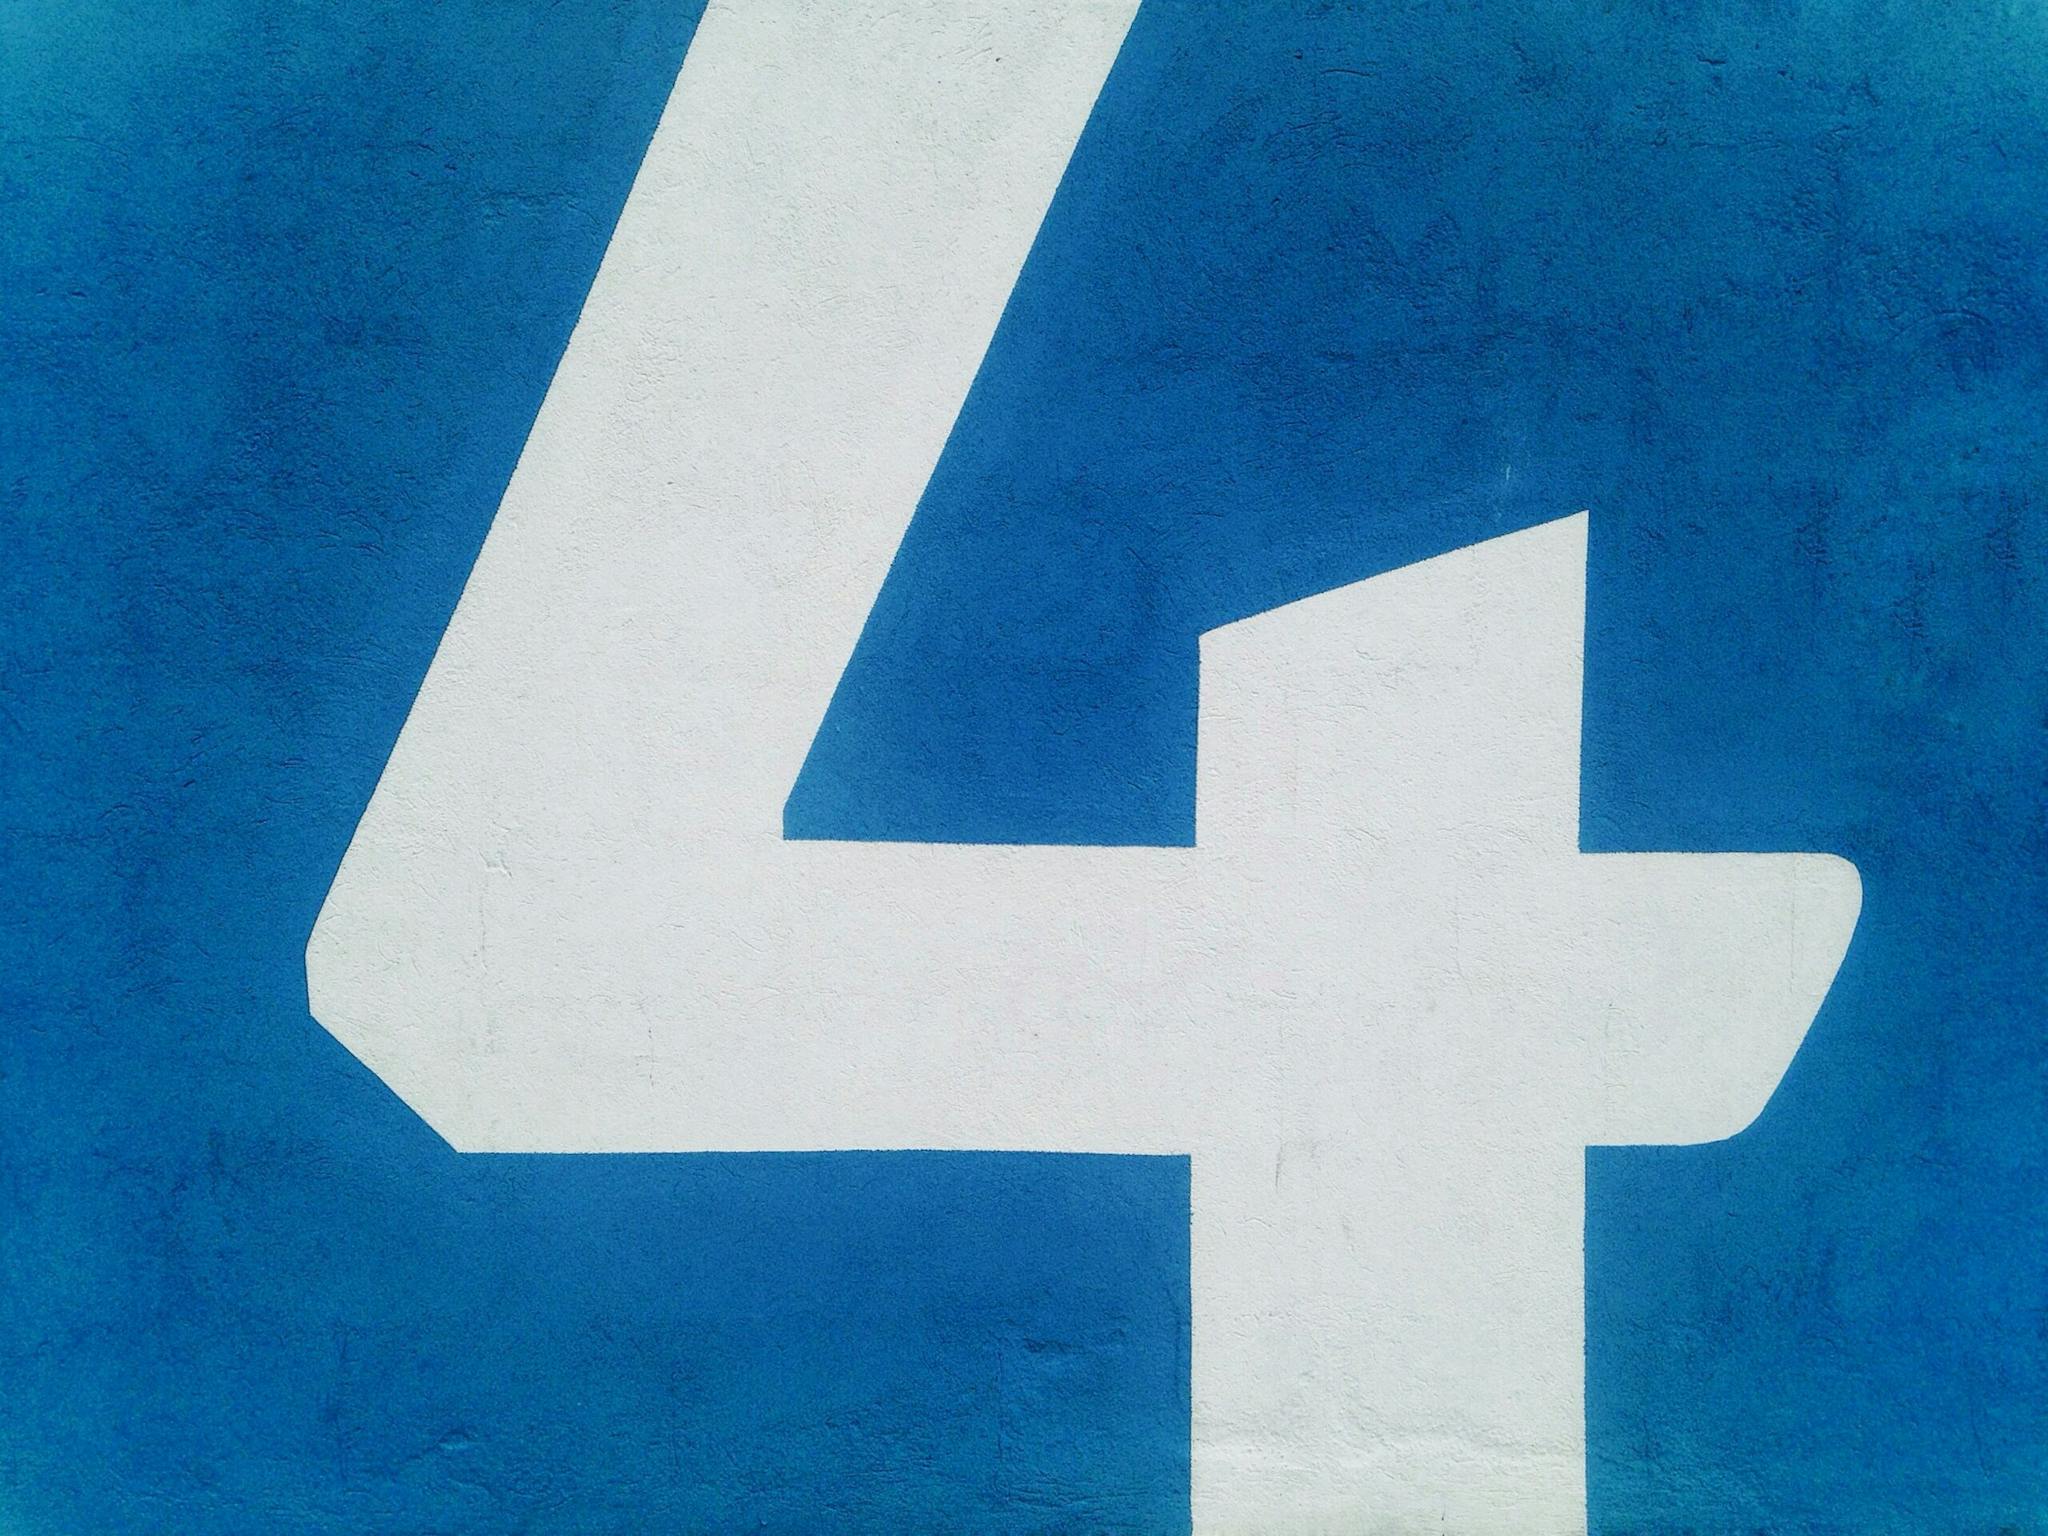 A blue and white number four, representing a numerical digit